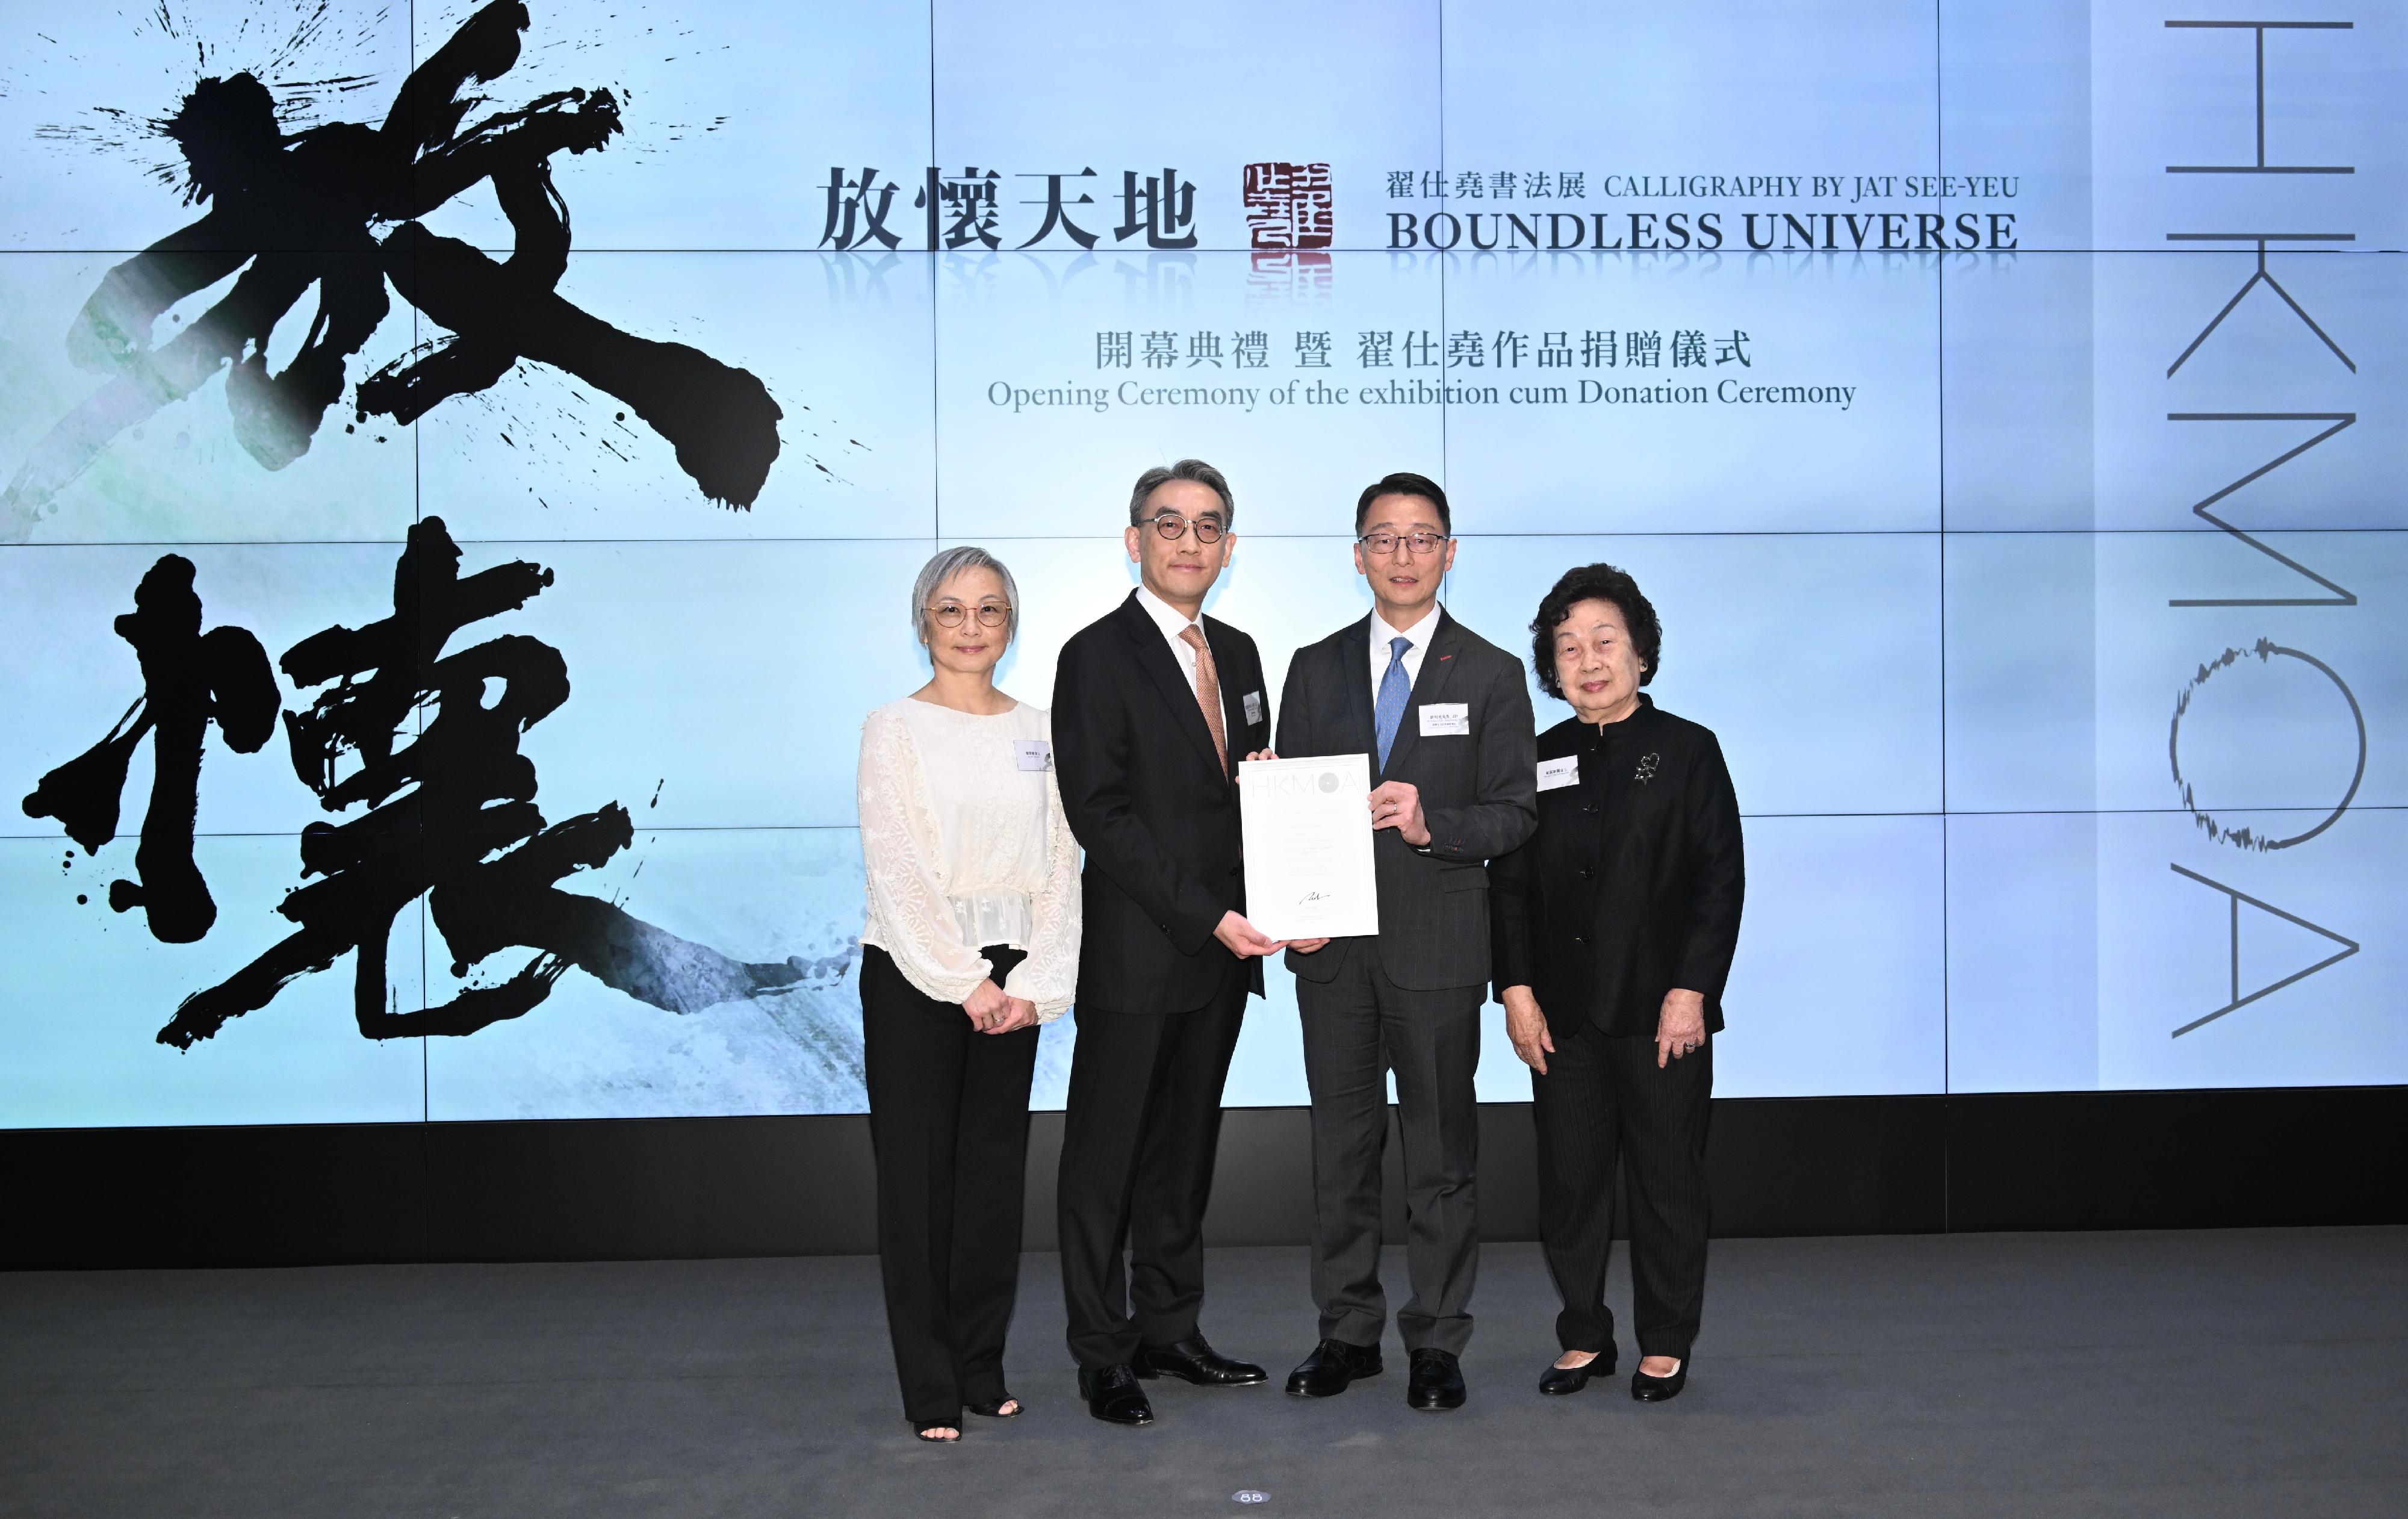 The opening ceremony of the "Boundless Universe: Calligraphy by Jat See-yeu" exhibition cum donation ceremony was held today (December 7) at the Hong Kong Museum of Art (HKMoA). Photo shows officiating guests including the Director of Leisure and Cultural Services, Mr Vincent Liu (second right); Jat's son, Mr Jat Sew-tong, SC (second left); taking group photo with Jat's wife, Mrs Jat Hwang Sun-lun (first right) and daughter, Ms Jat Mo-yue (first left).